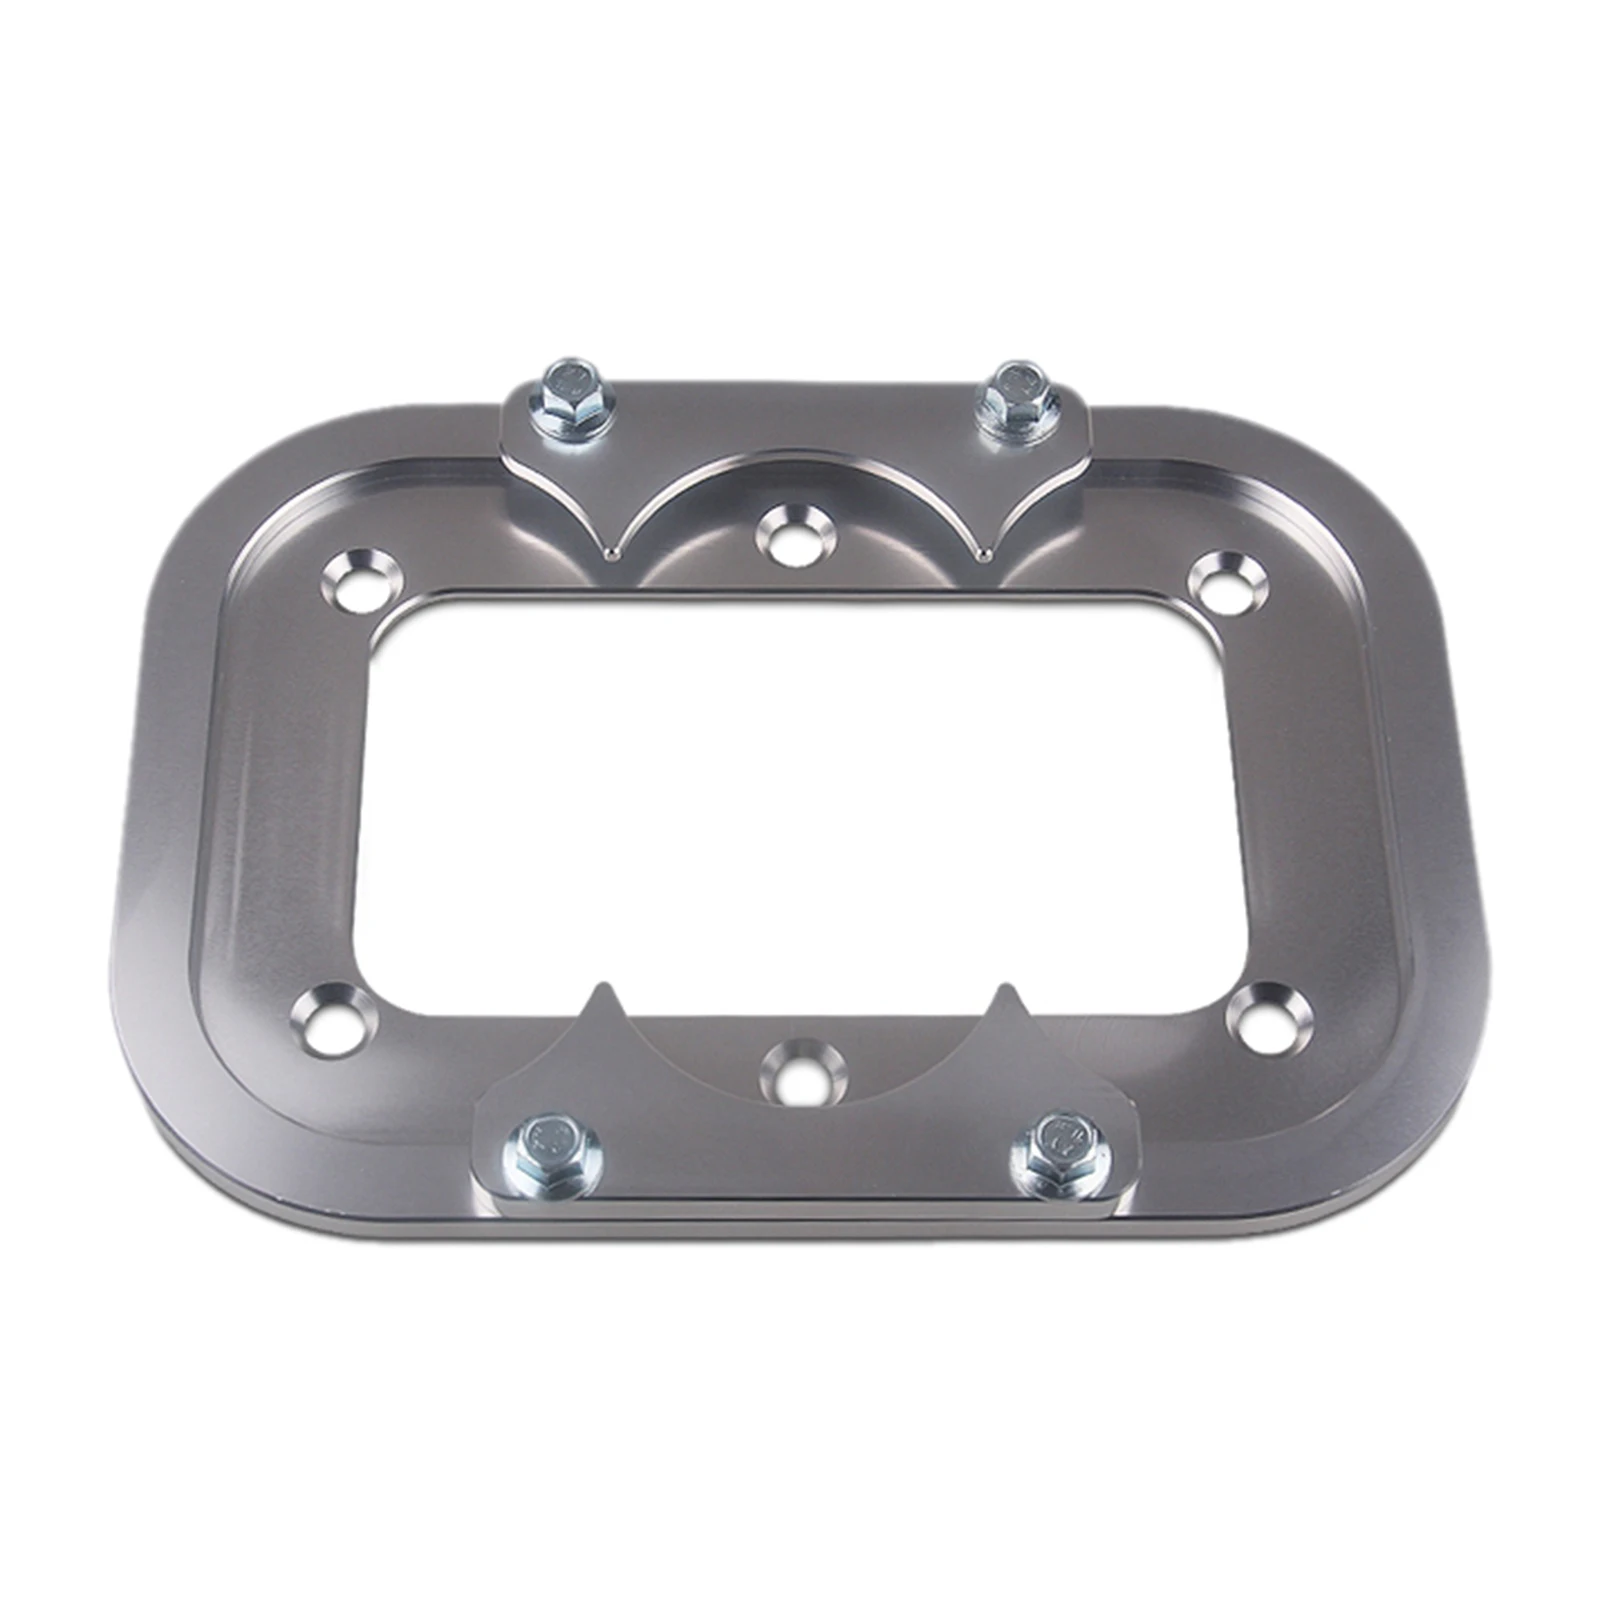 Billet Aluminum Battery Relocation Tray Bracket Hold Down Mount for Optima Red Yellow Blue Top D34/78 D34 D34M 34M